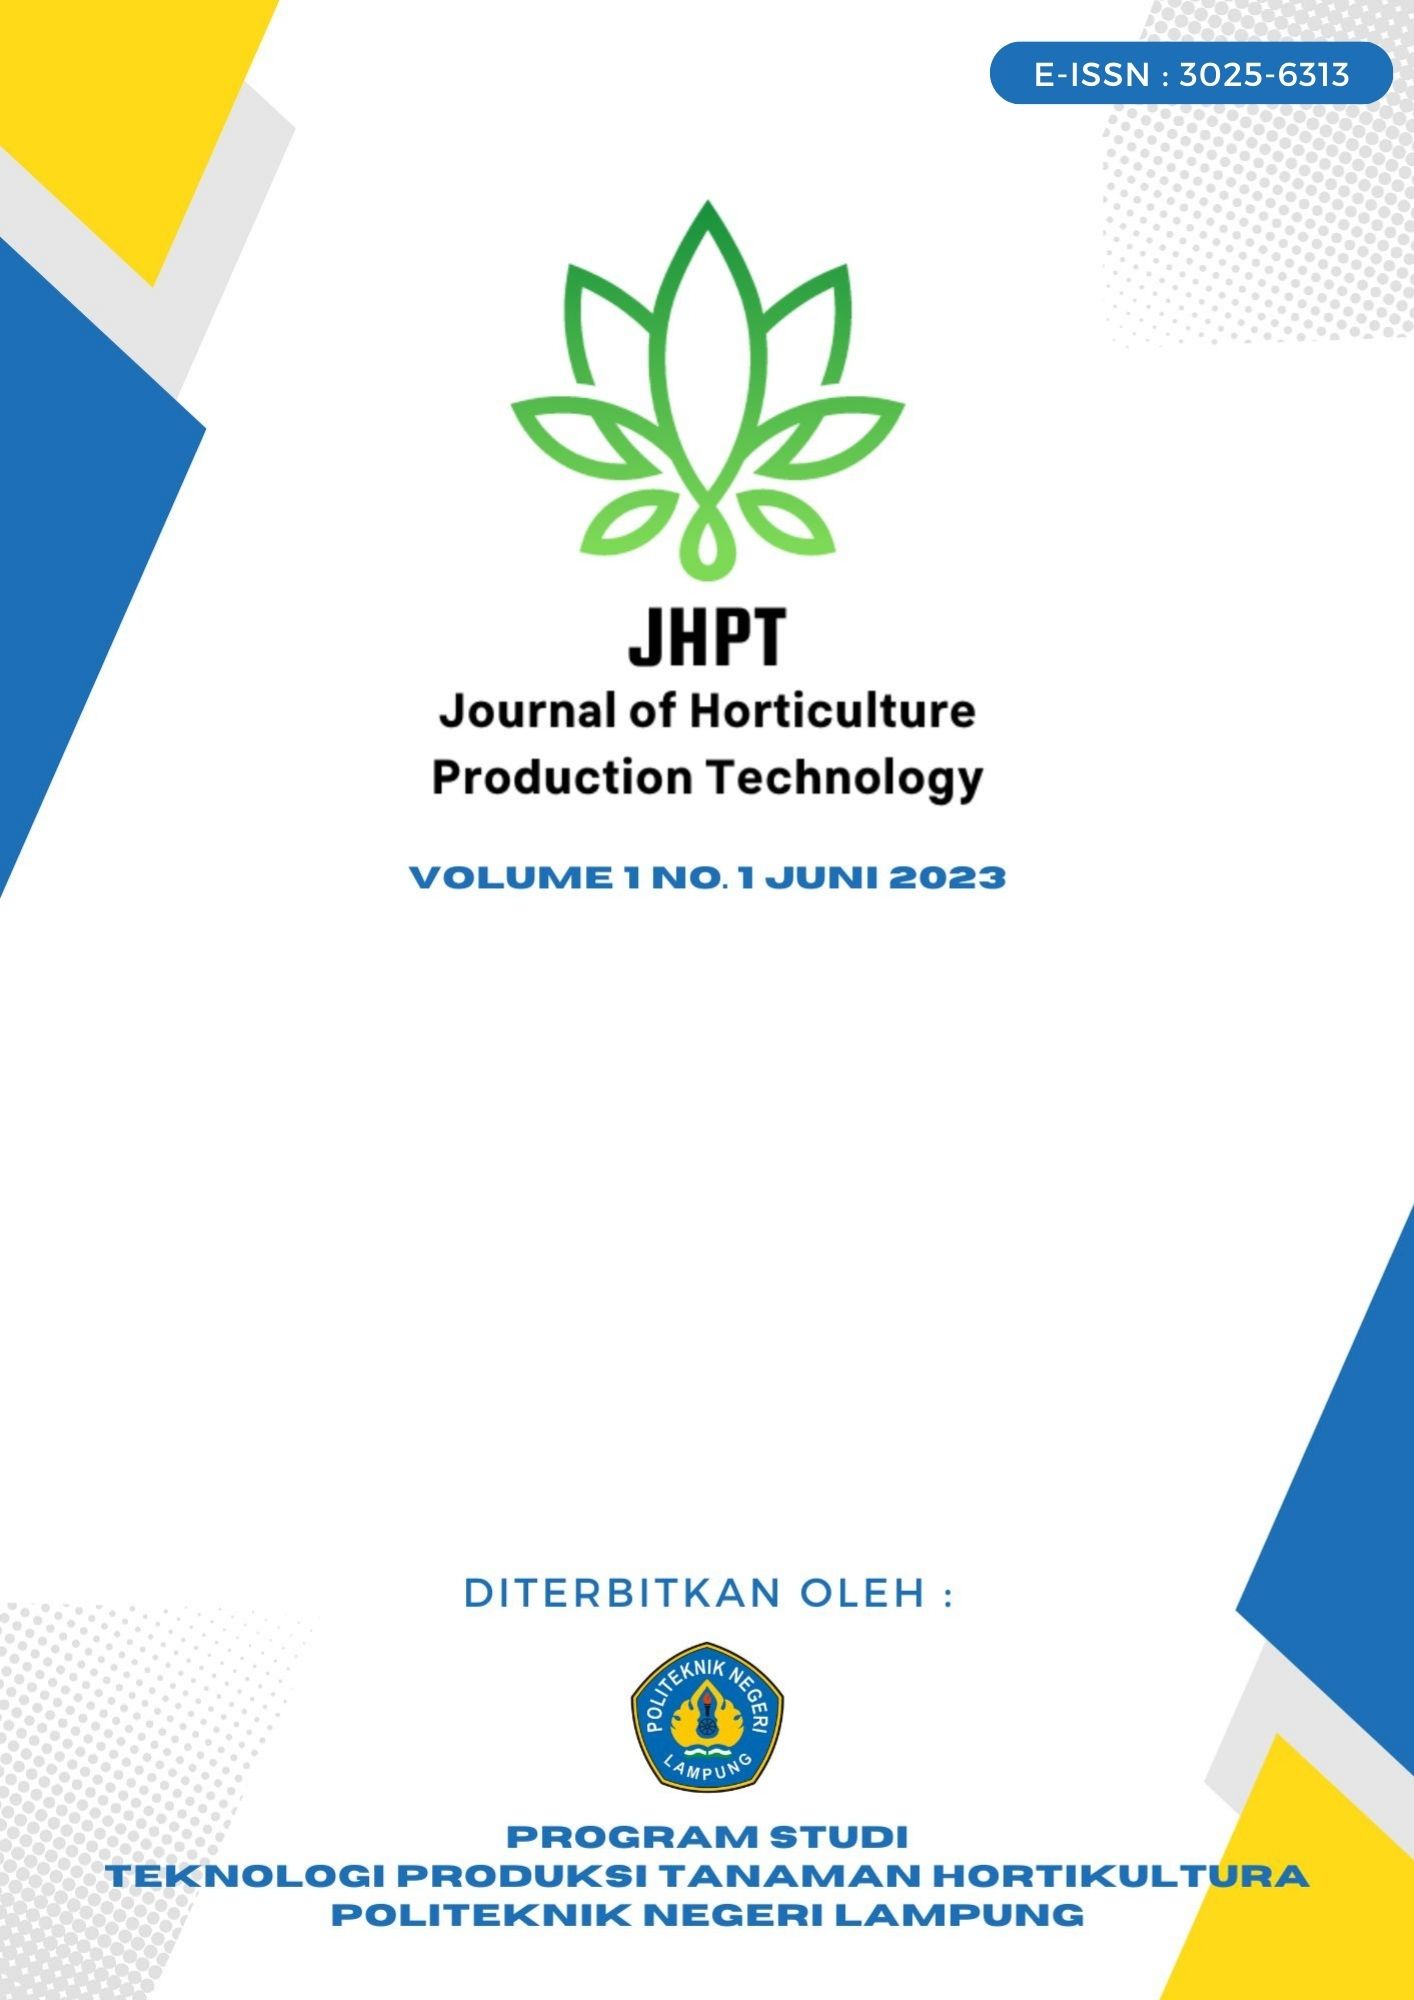 jhpt cover